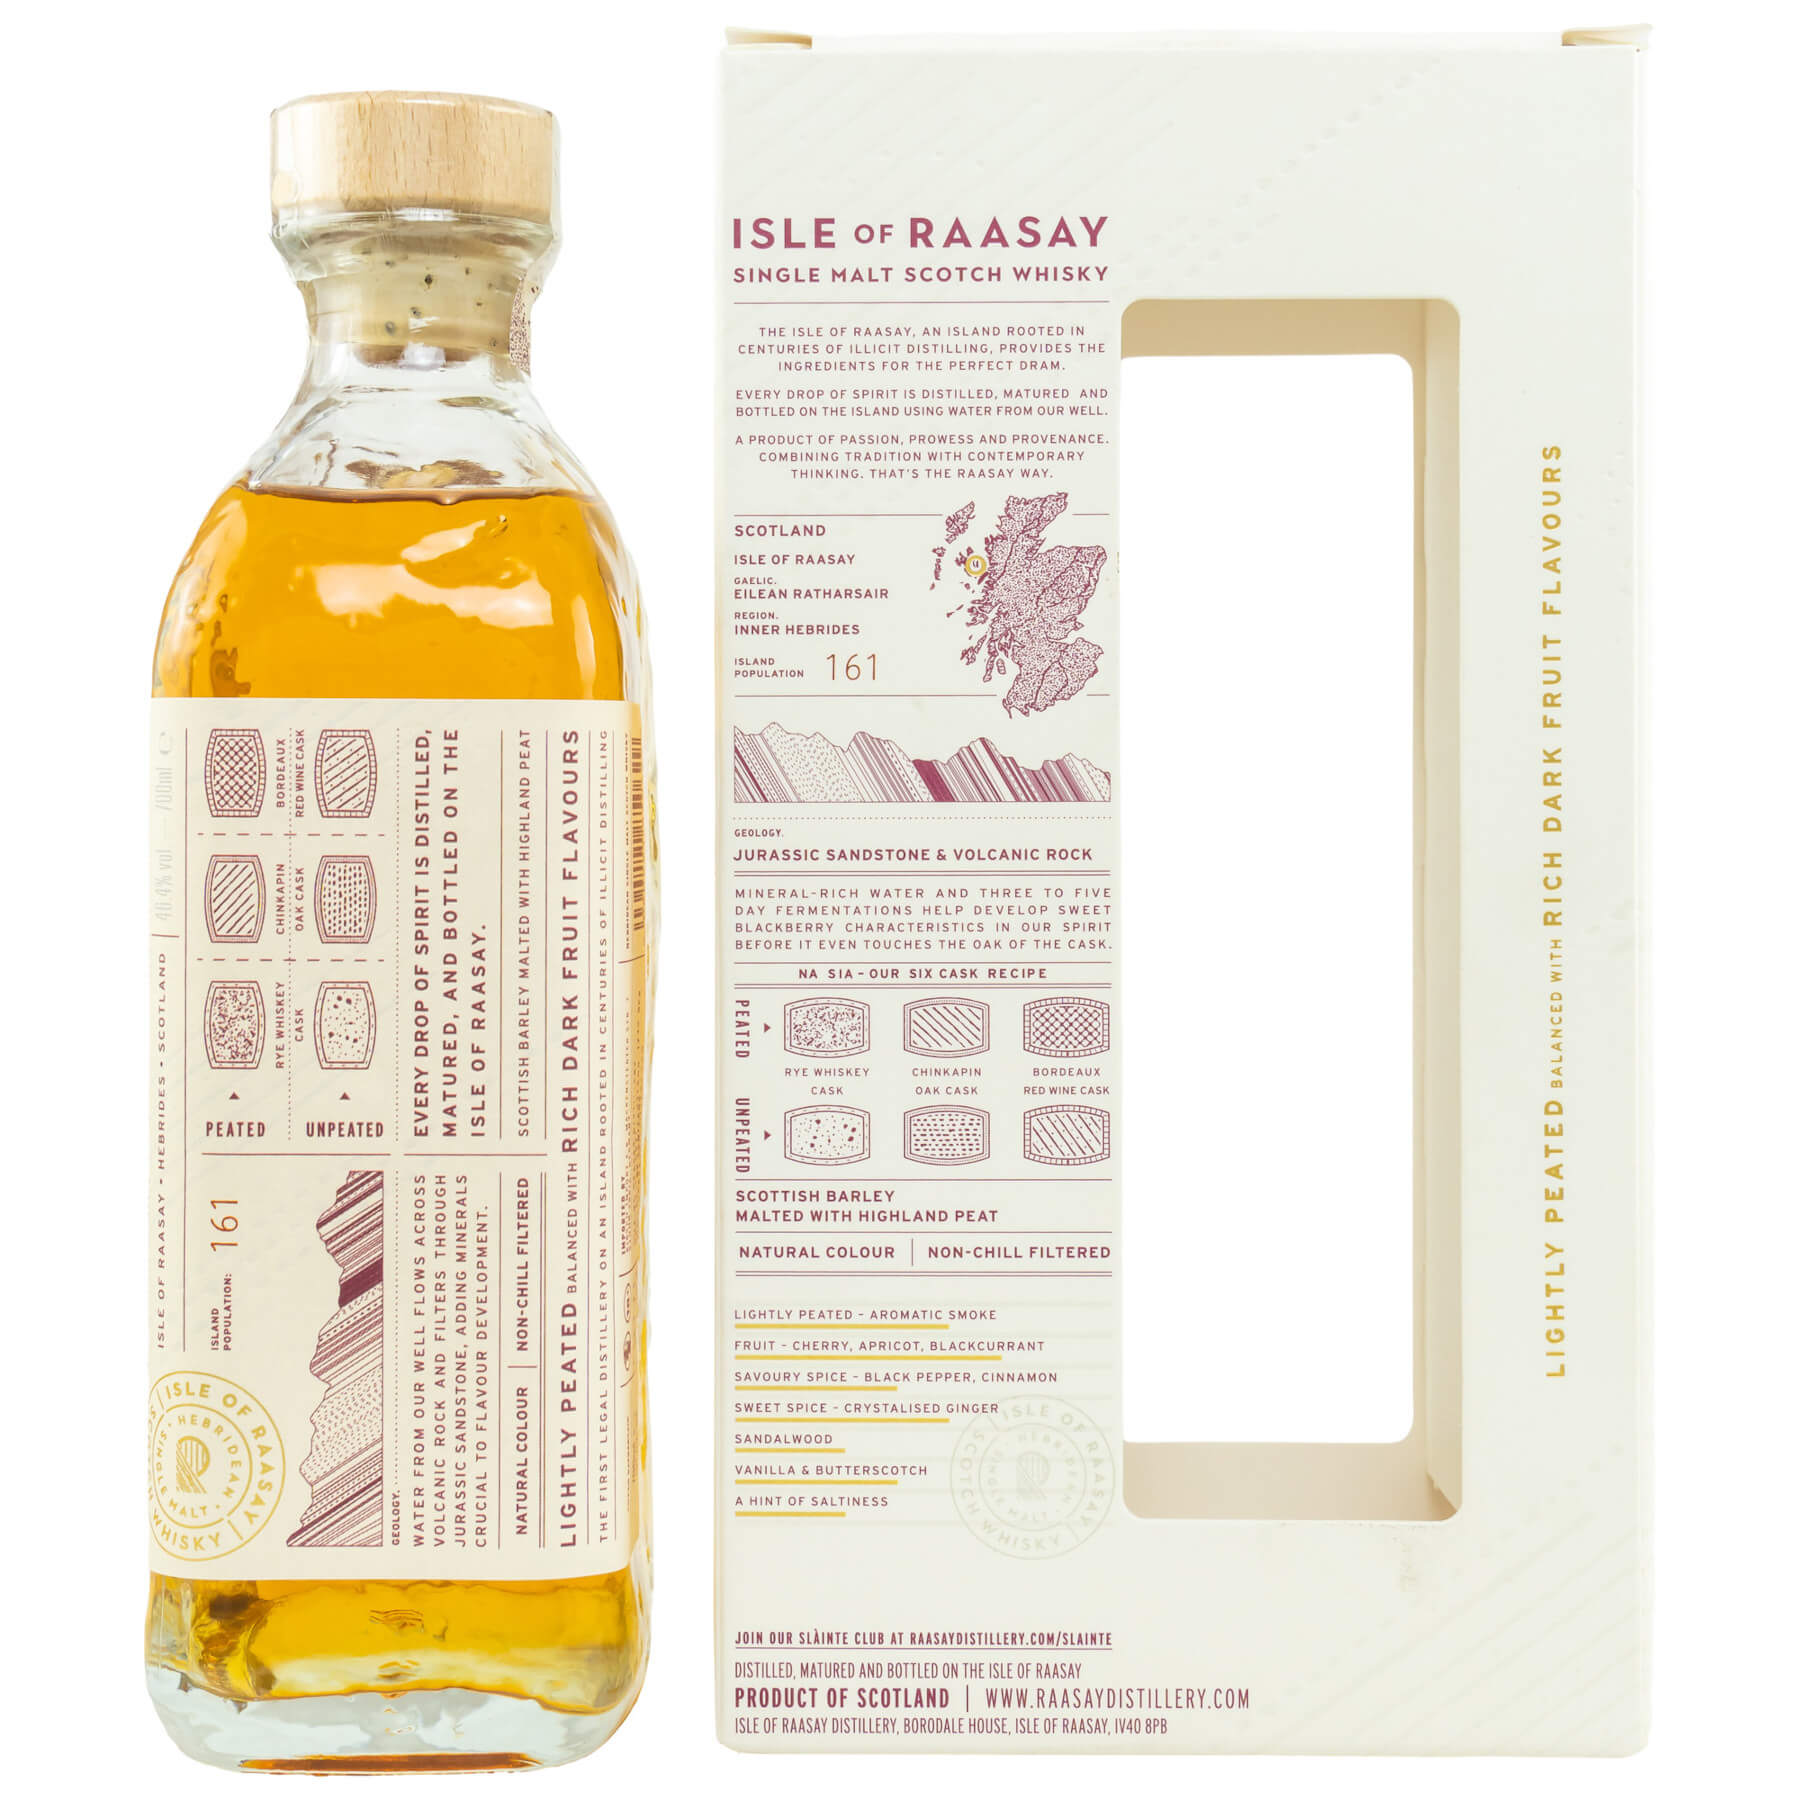 Flasche und Verpackung Isle of Raasay Single Malt Whisky Lightly Peated Batch R-01.1 Seite